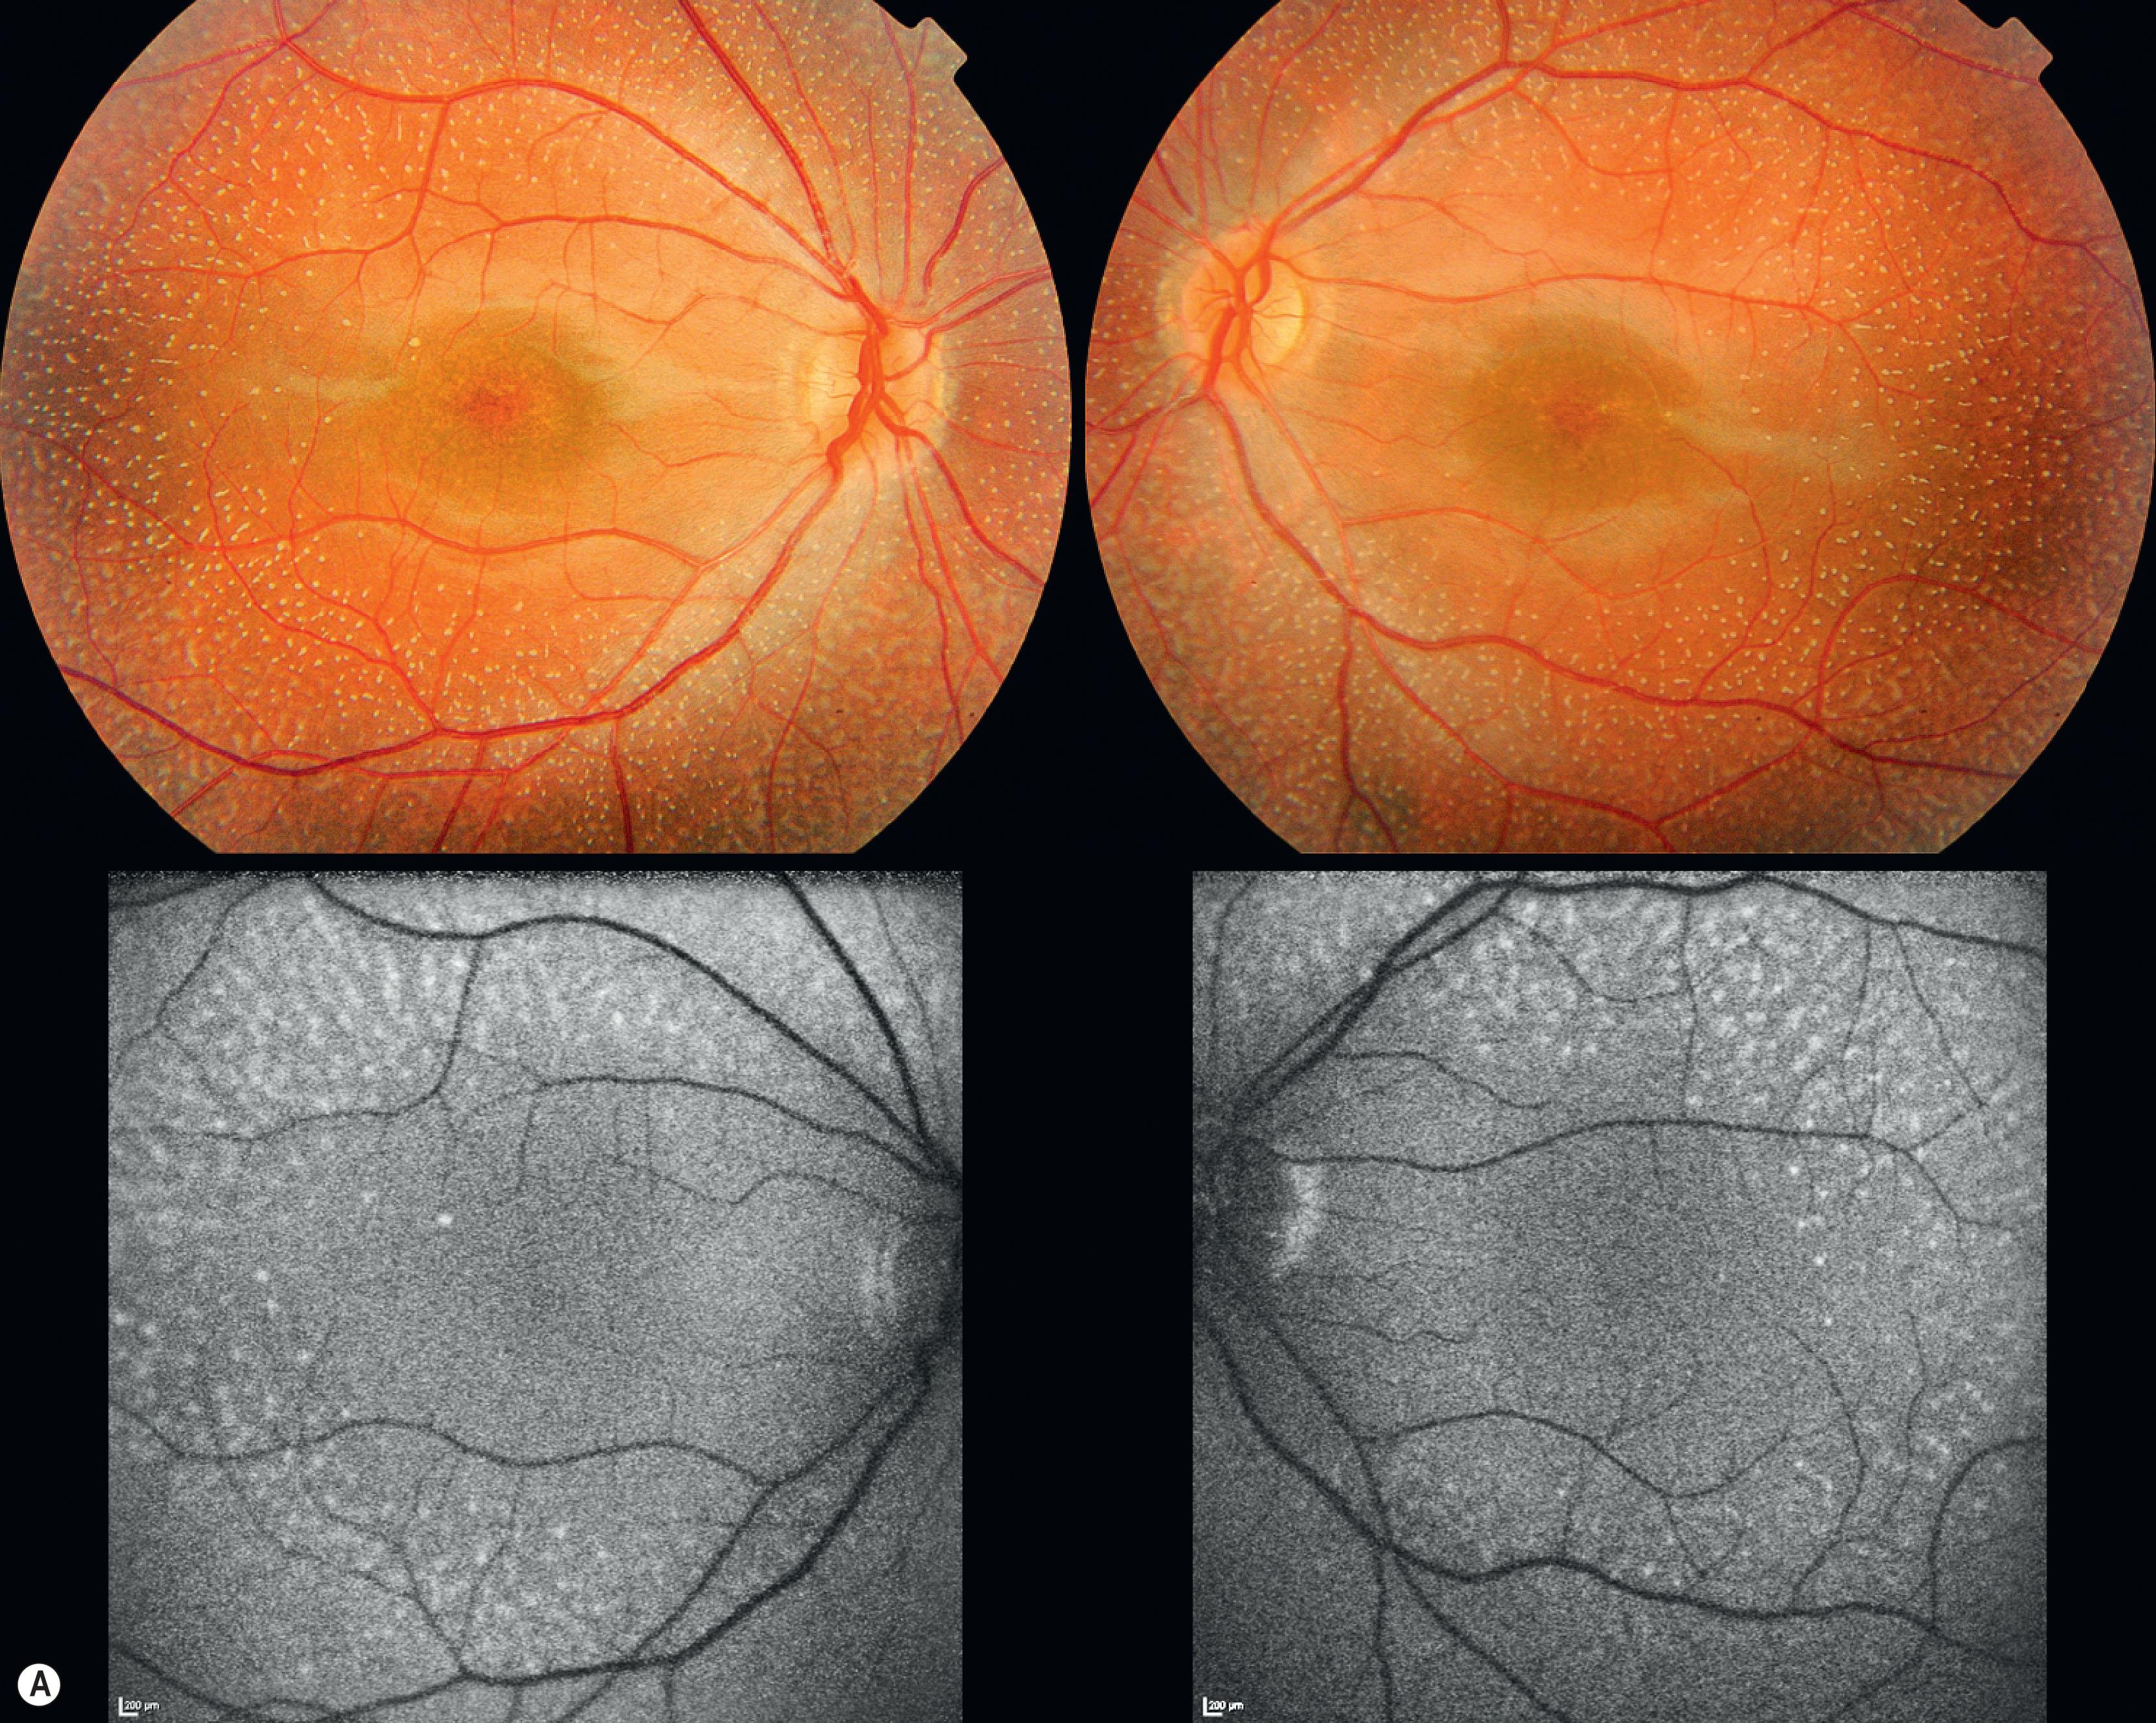 Fig. 49.3, Fundus albipunctatus. (A) Fundus photograph of the left and right eyes of an 18-year-old RDH5 mutation-positive individual (top row). Fundus autofluorescence imaging (bottom row) revealed hyperautofluorescent lesions; these are unlikely to represent lipofuscin accumulation. (B) Fundus photographs of the left and right eyes of a 10-year-old, RDH5 mutation-positive individual (top row). Optical coherence tomography (horizontal, centered on the fovea, linear scan of the left eye; bottom row) revealed hyper-reflective lesions extending from the retinal pigment epithelium to the outer nuclear layer.